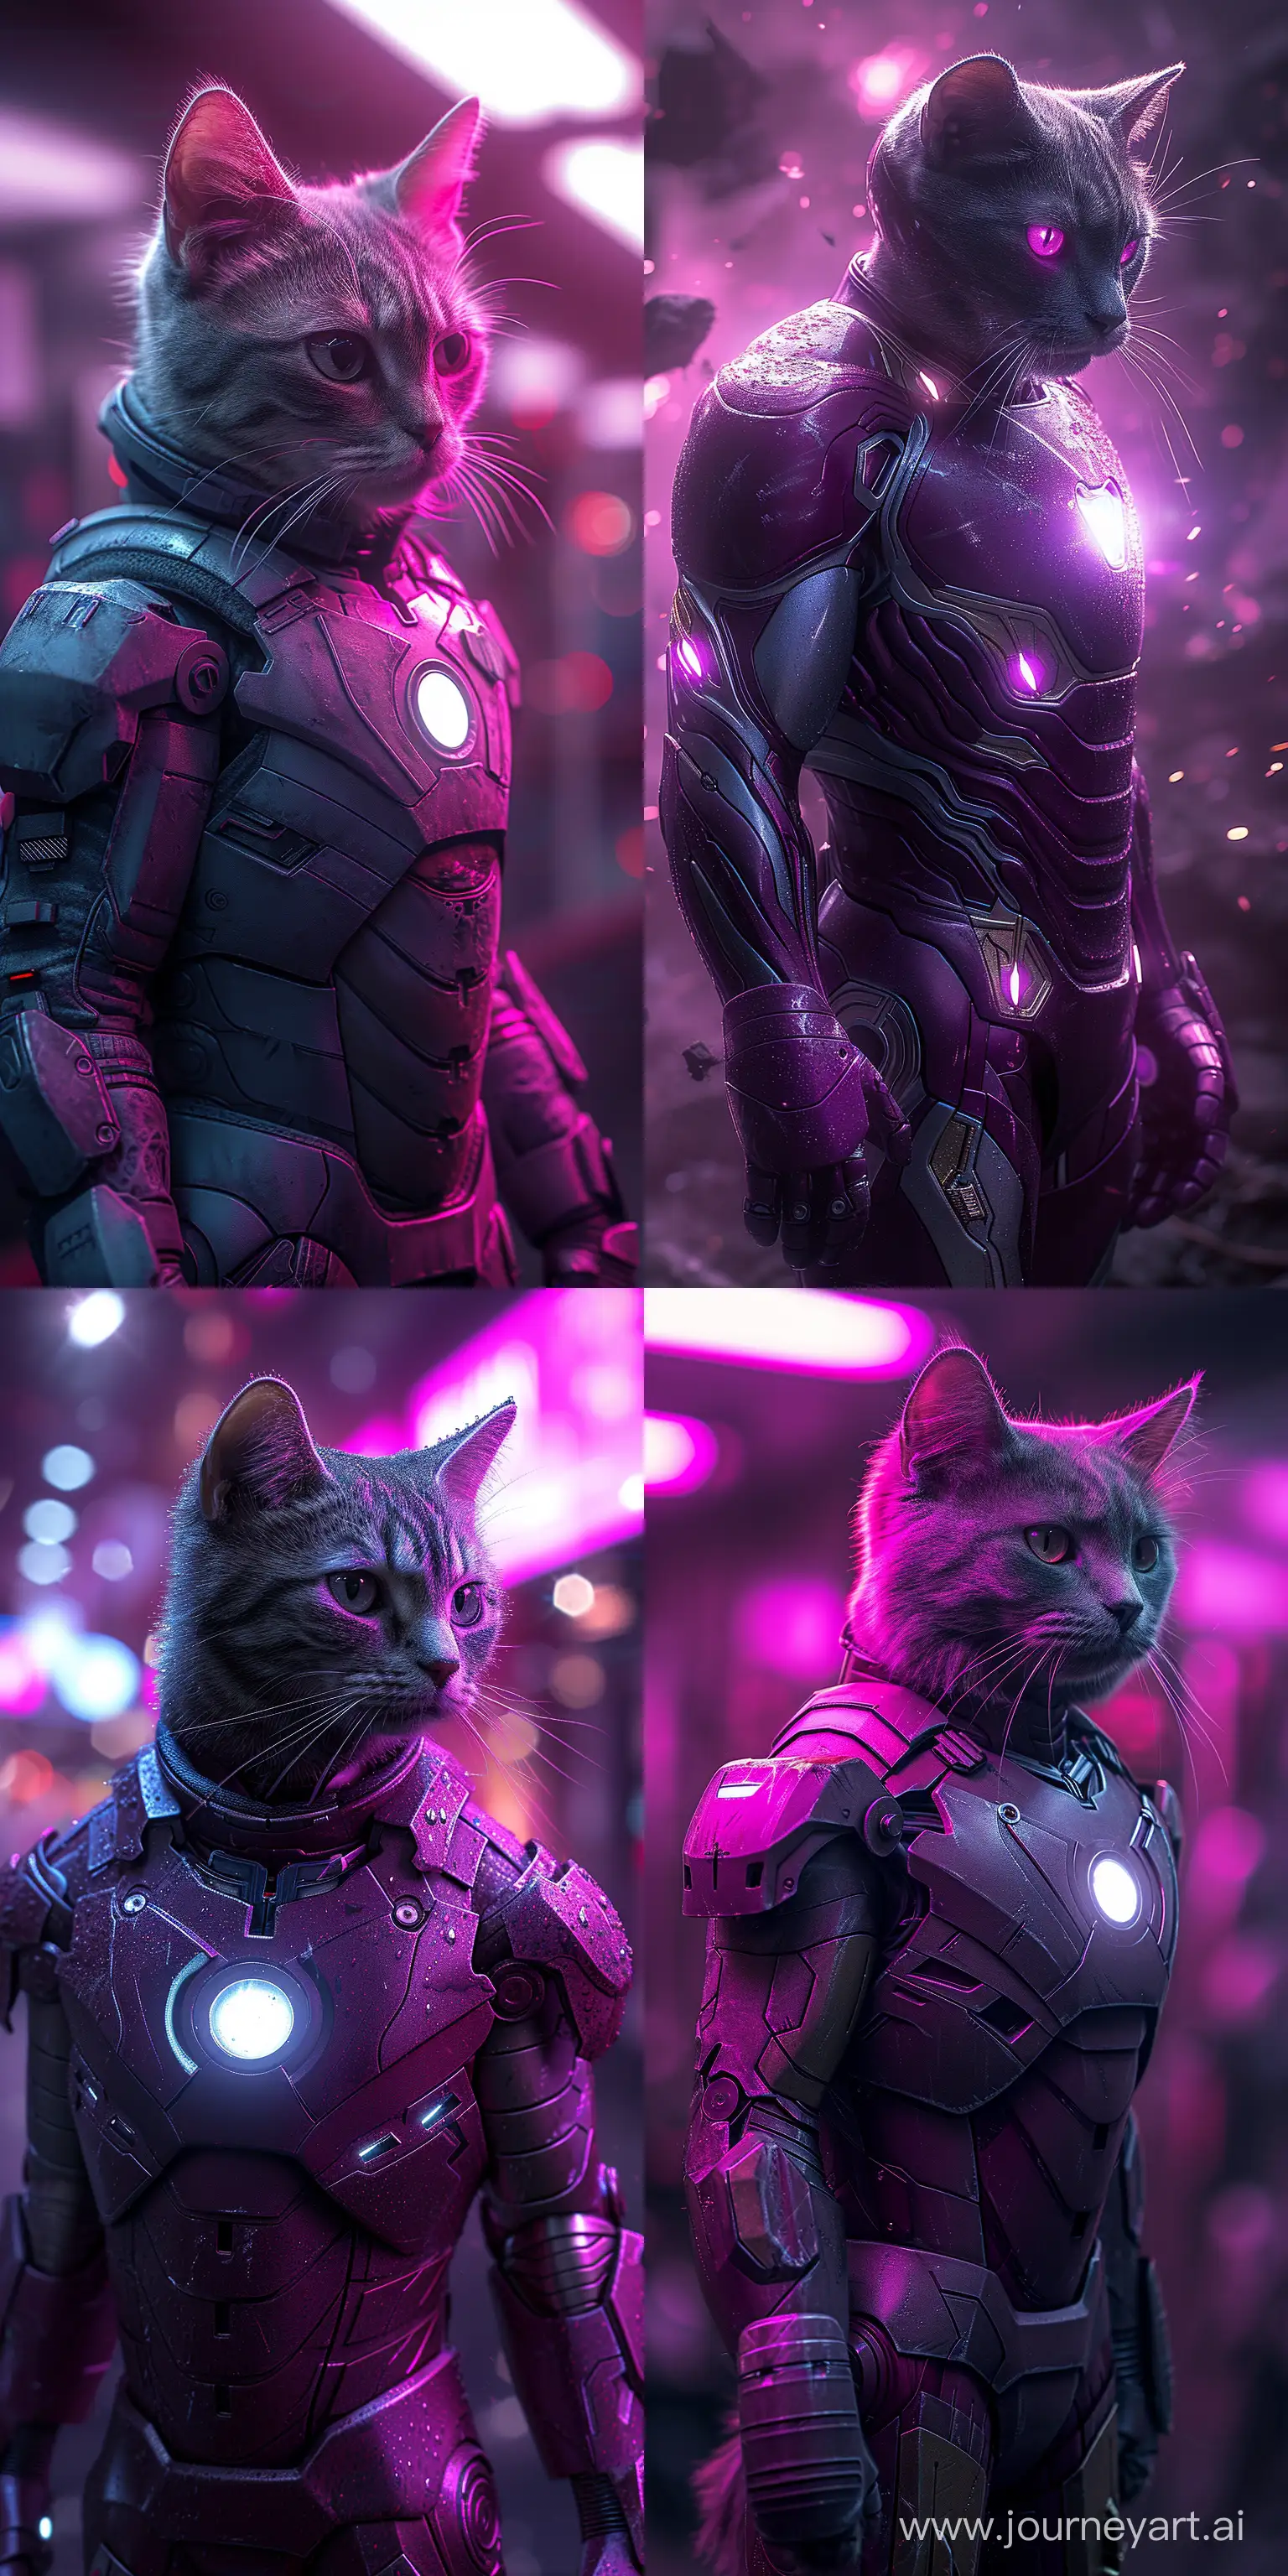 Majestic-Cat-in-Iron-Man-Suit-Dynamic-Pose-in-Cinematic-Lighting